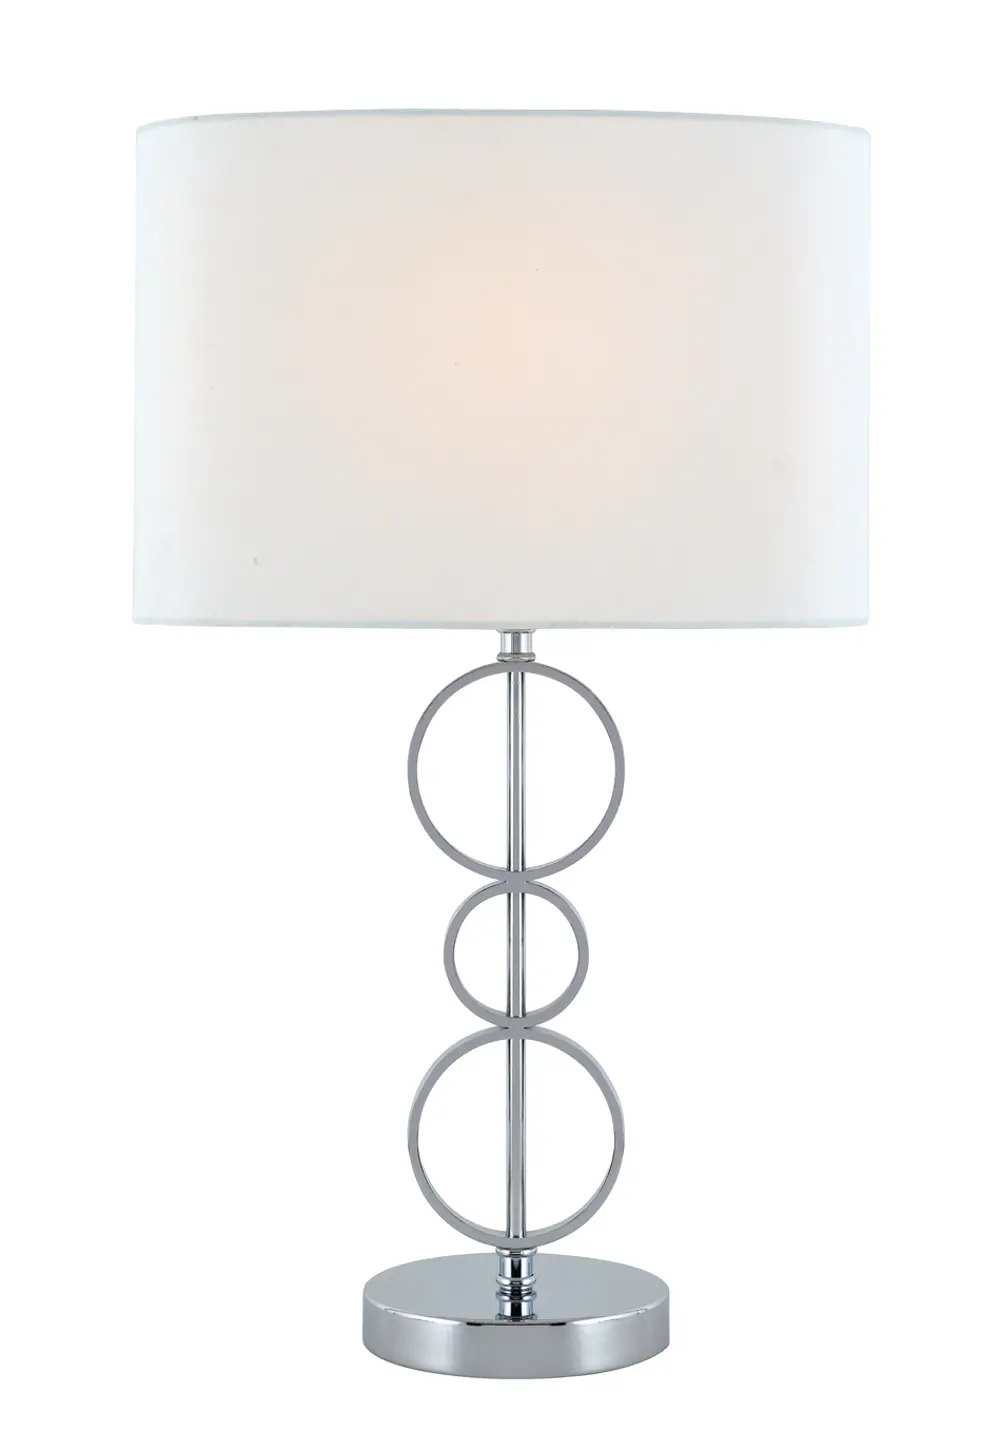 Stacked 3-Ring Table Lamp - Odele-1